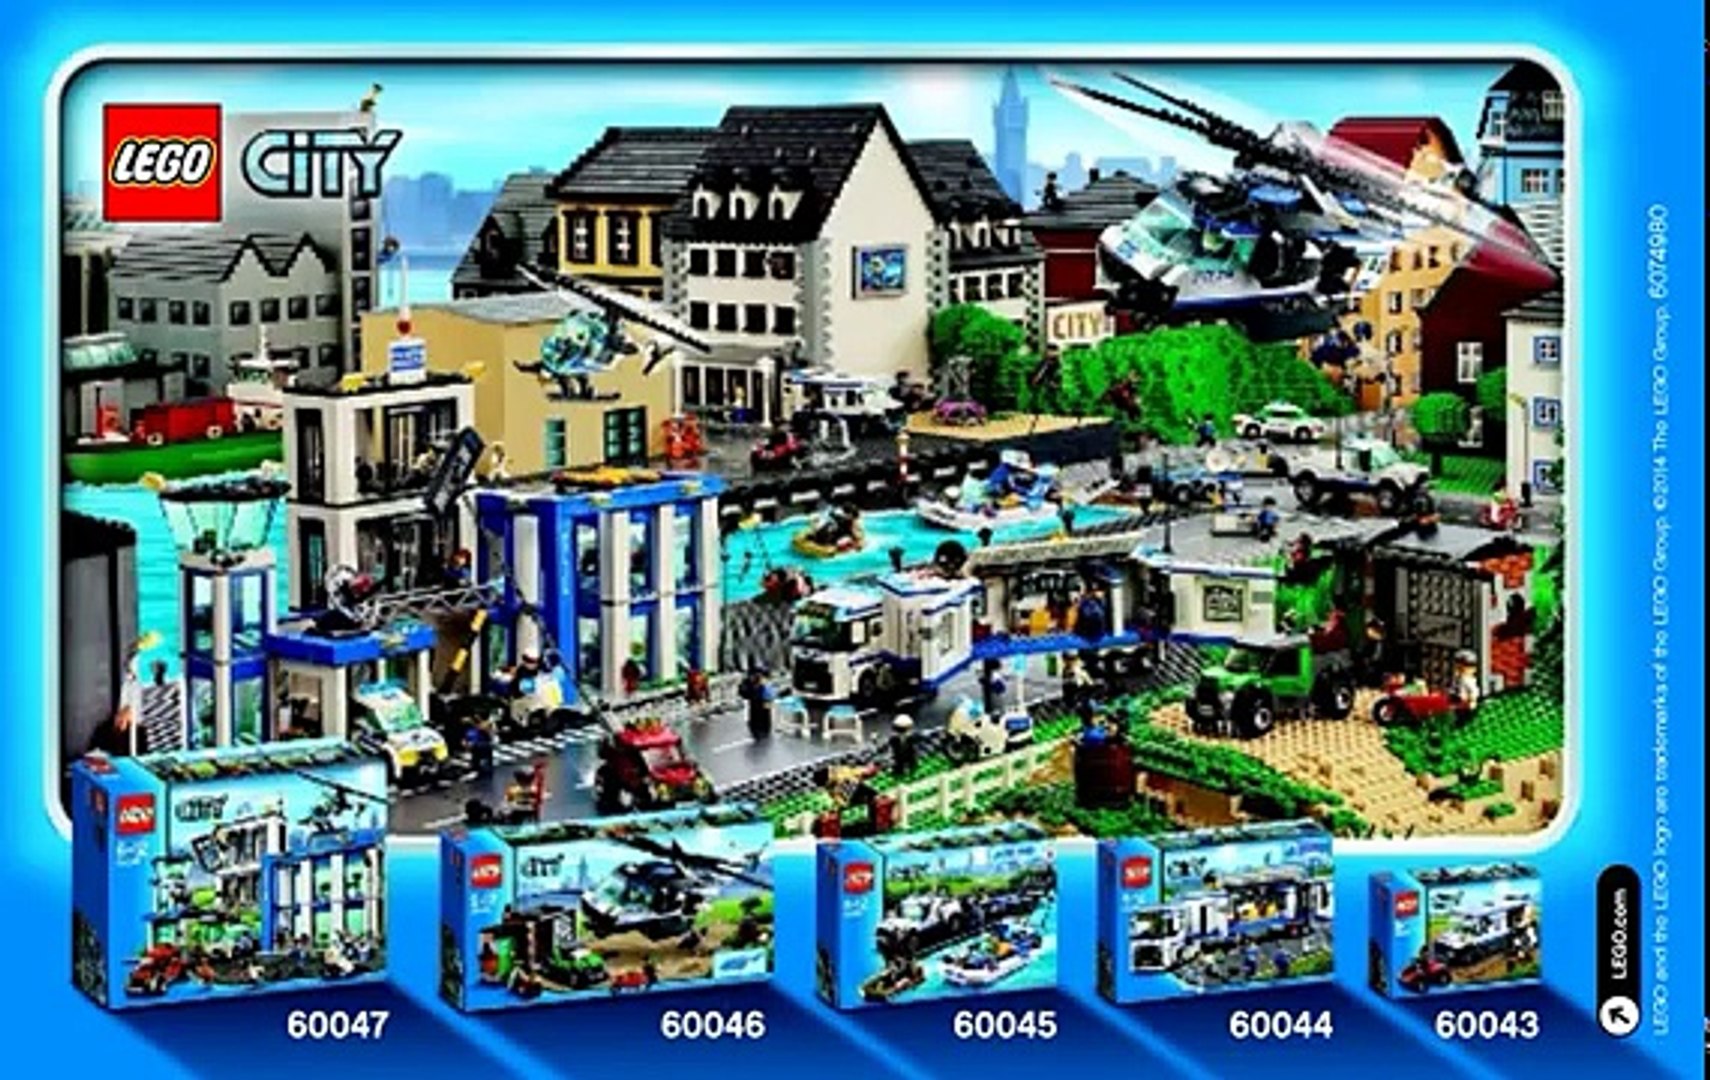 Lego City Police Helicopter Surveillance Instructions Lego 影片dailymotion